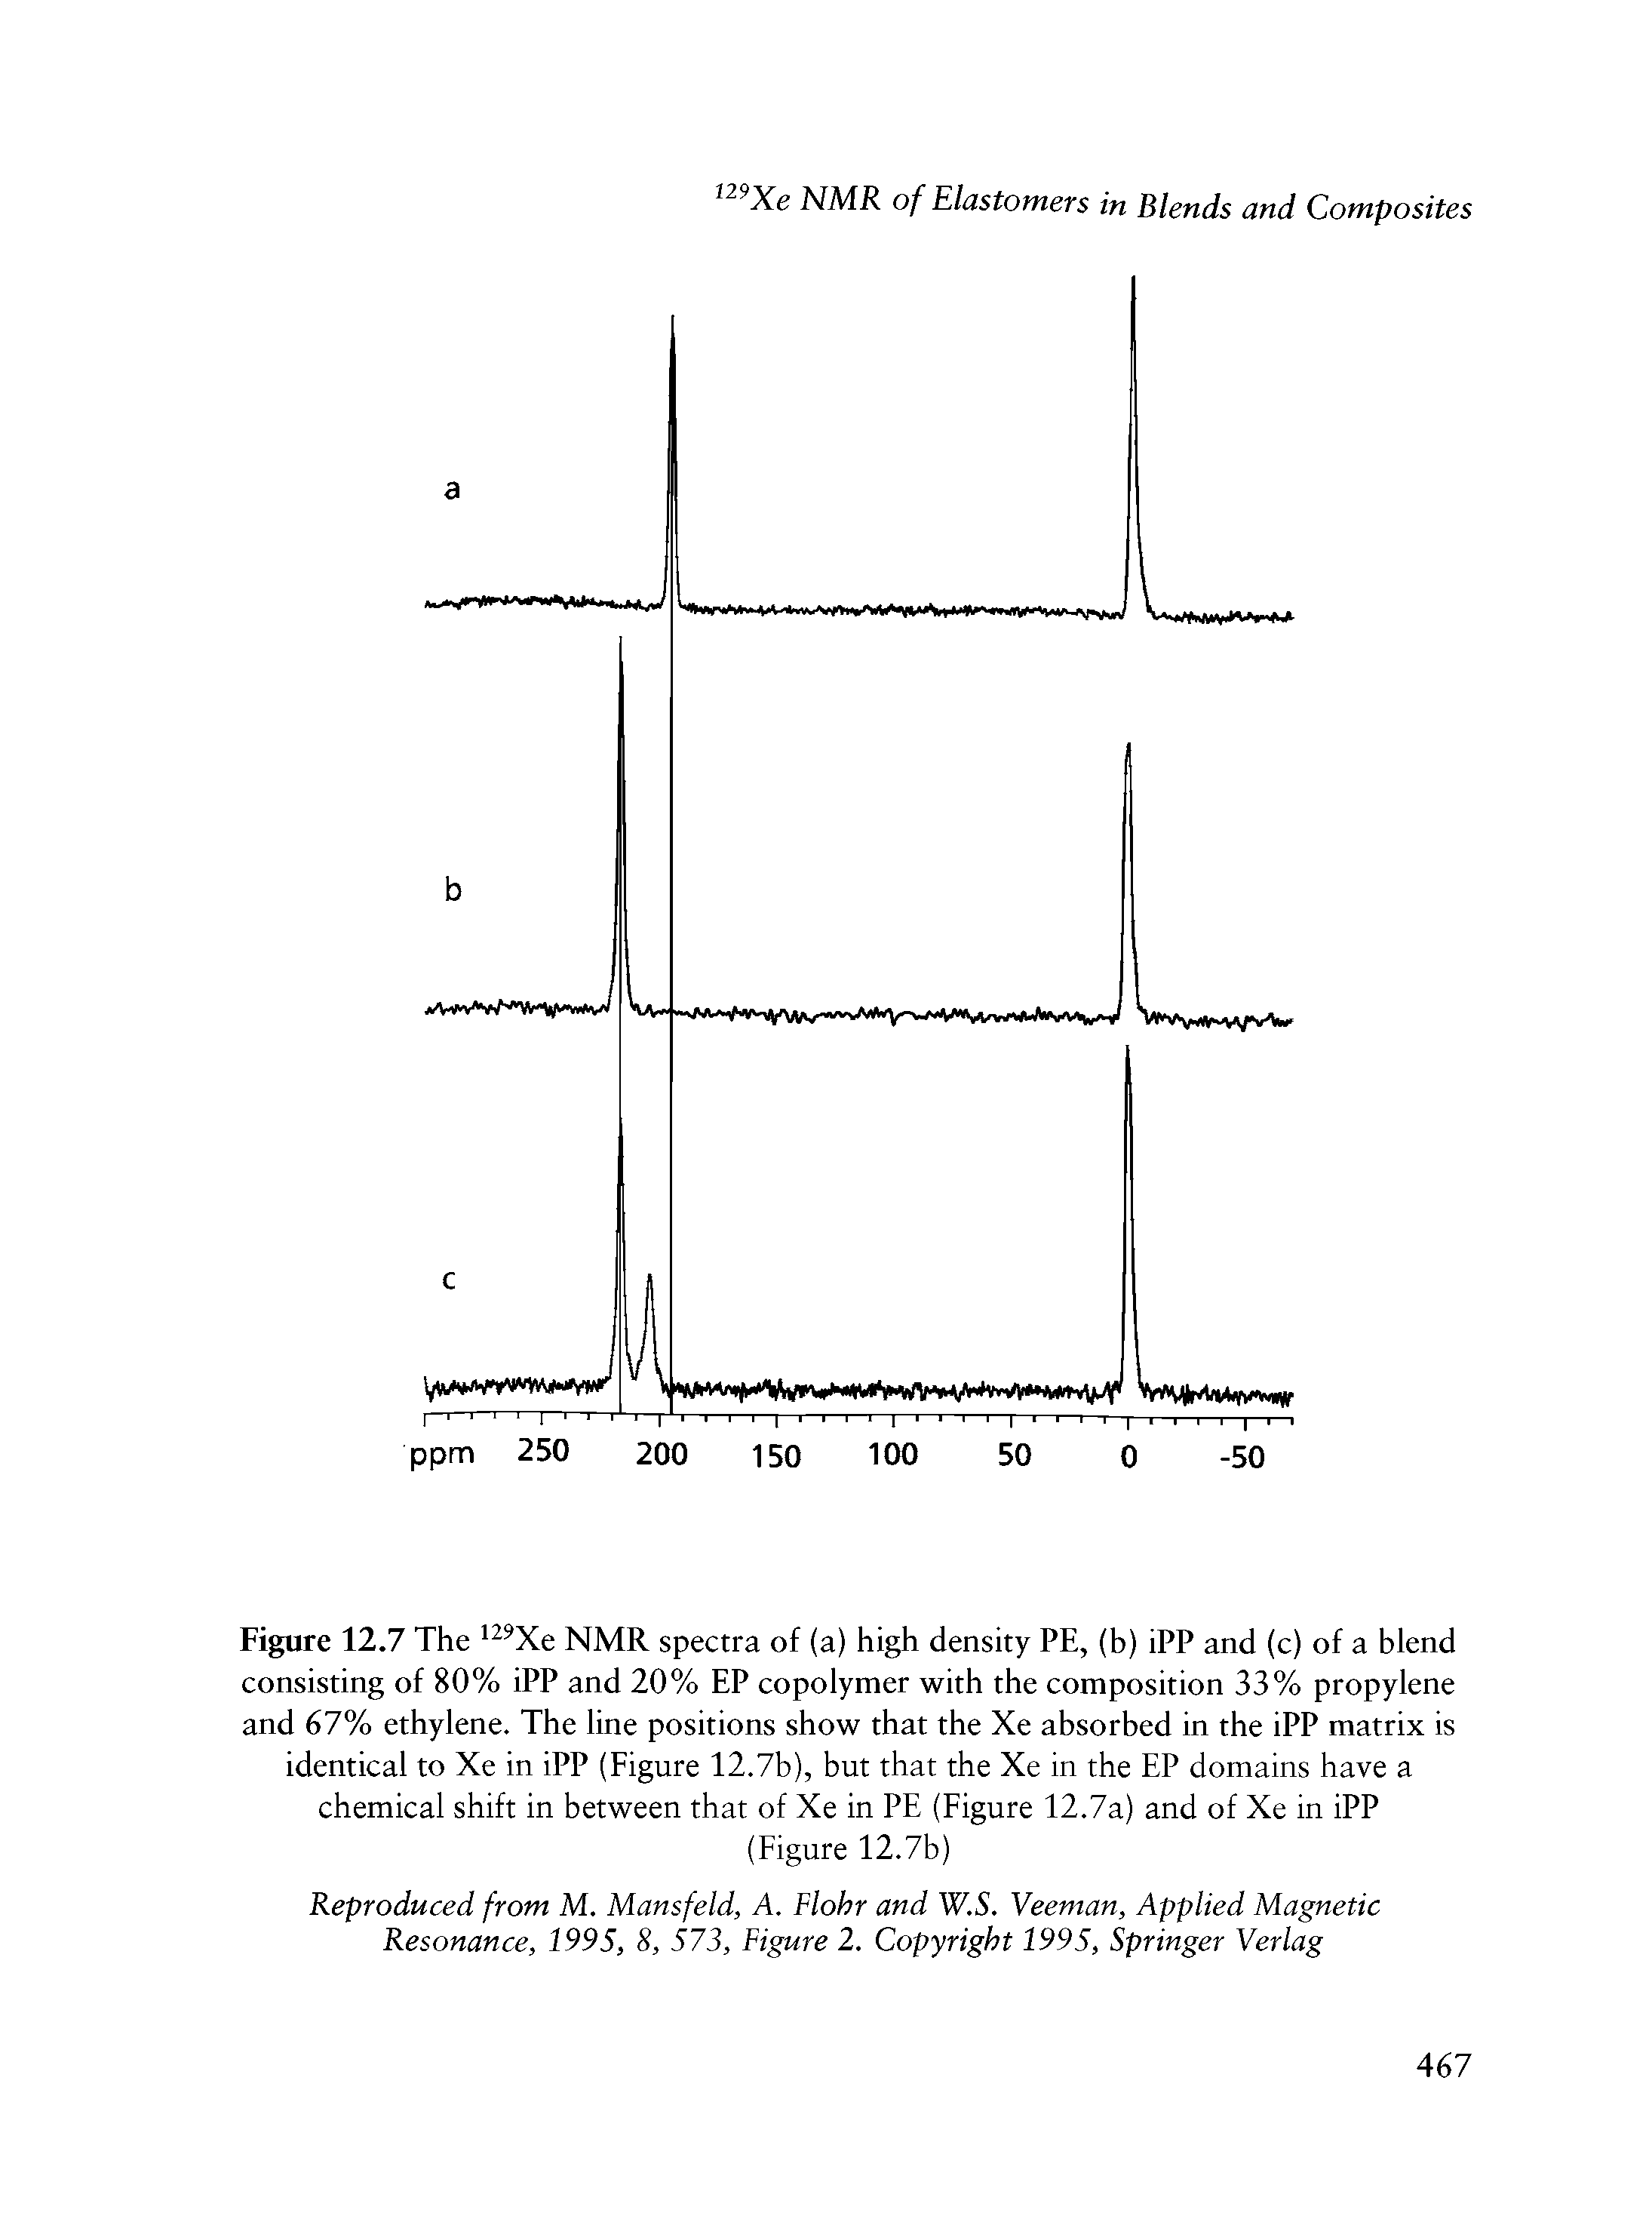 Figure 12.7 The 129Xe NMR spectra of (a) high density PE, (b) iPP and (c) of a blend consisting of 80% iPP and 20% EP copolymer with the composition 33% propylene and 67% ethylene. The line positions show that the Xe absorbed in the iPP matrix is identical to Xe in iPP (Figure 12.7b), but that the Xe in the EP domains have a chemical shift in between that of Xe in PE (Figure 12.7a) and of Xe in iPP...